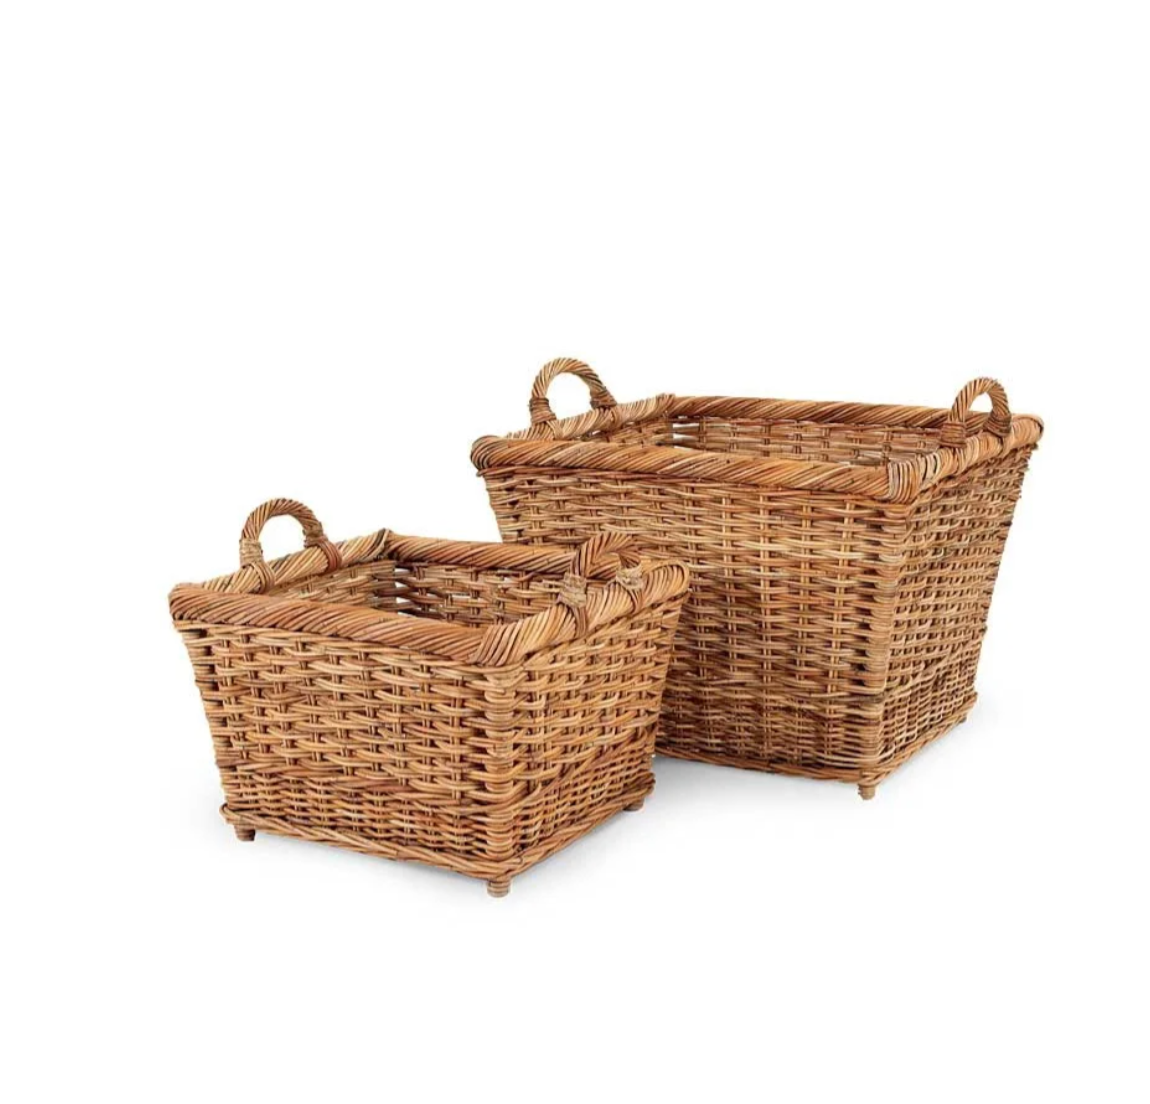 FRENCH COUNTRY HEARTH BASKETS